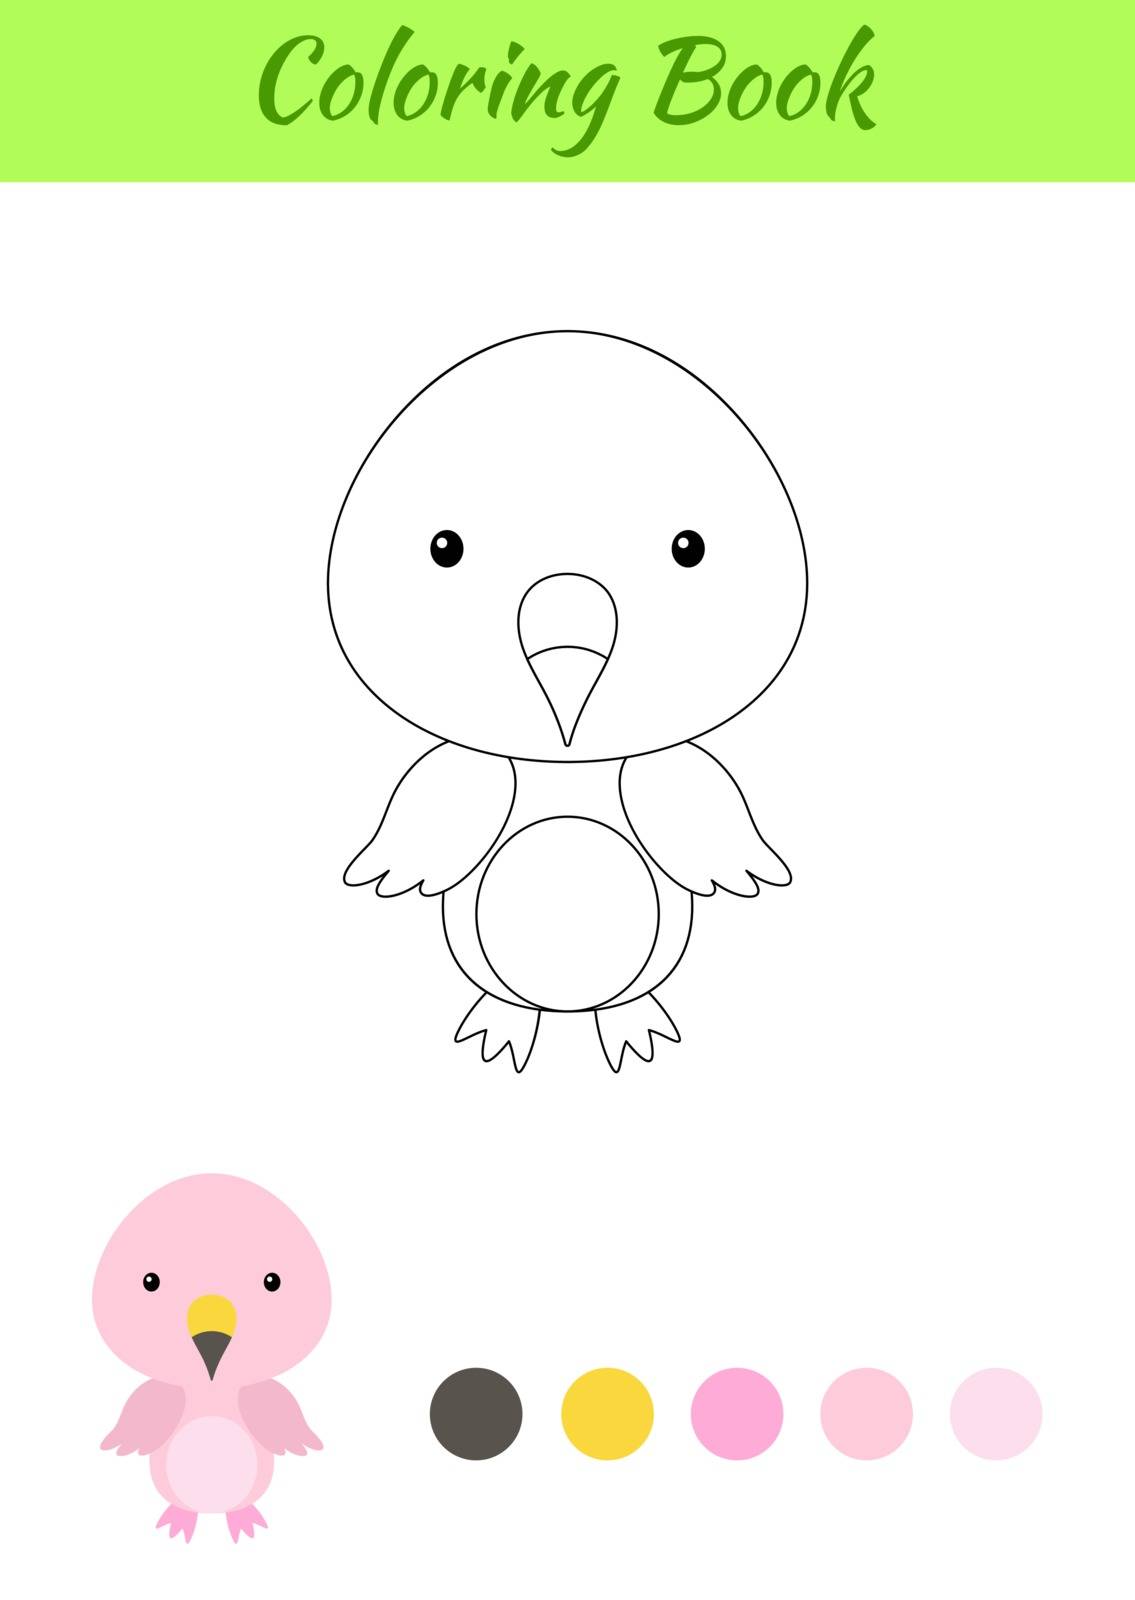 Coloring page happy little baby flamingo. Printable coloring boo by Melnyk